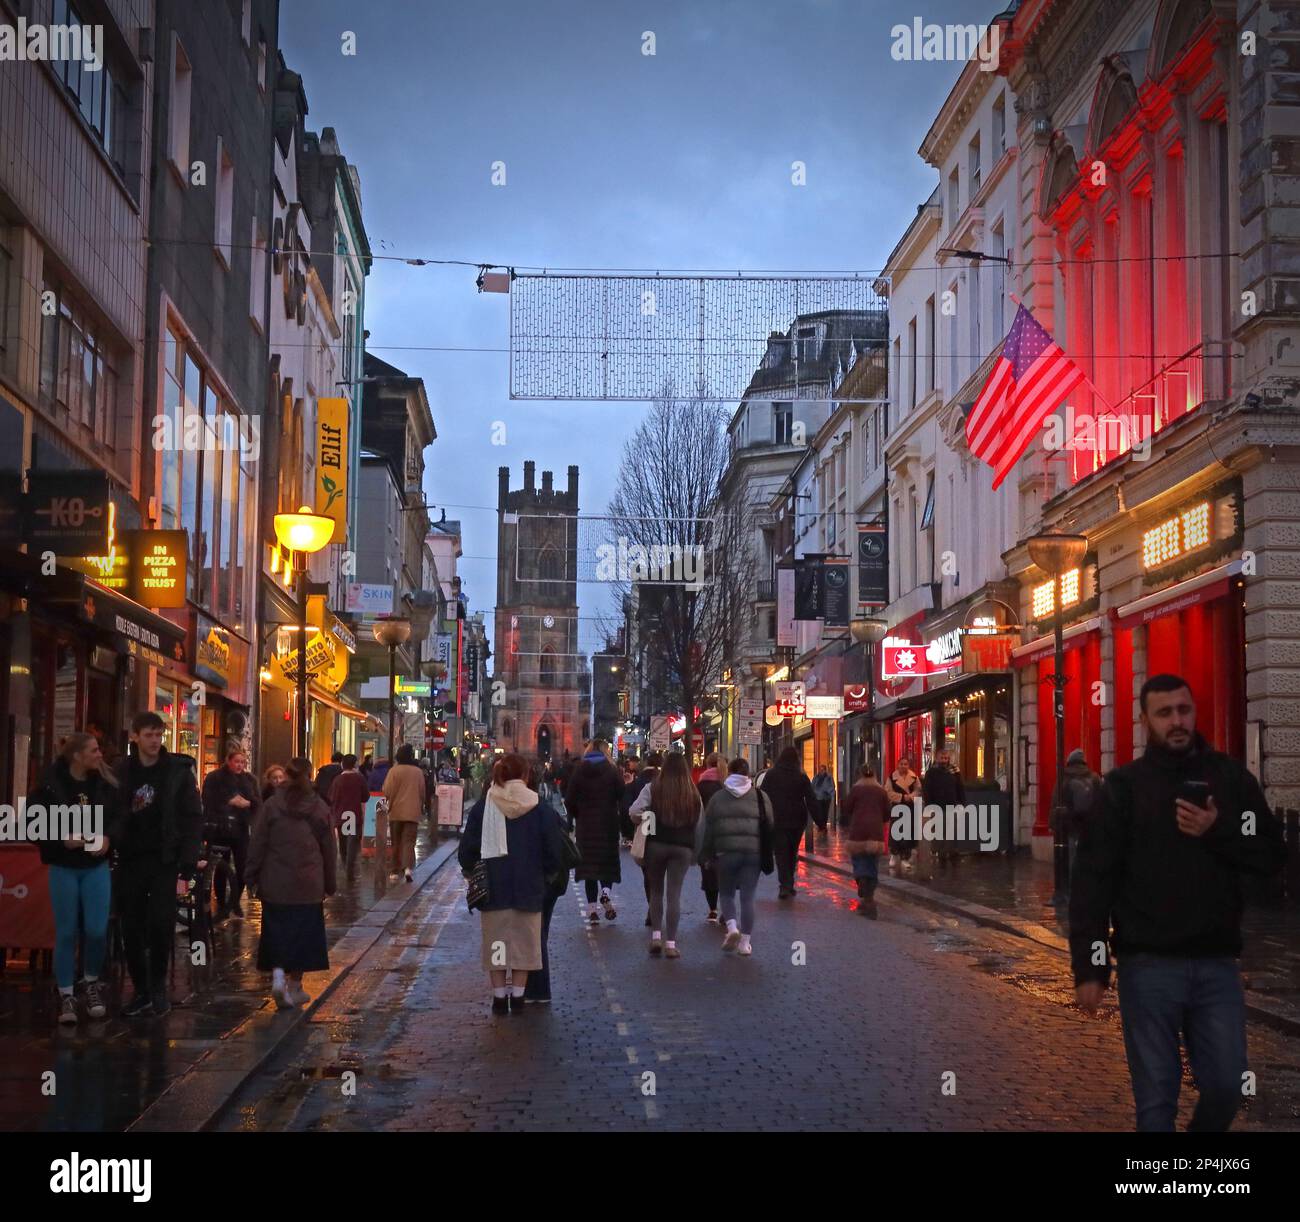 A busy Bold Street at dusk, Liverpool, Merseyside, England, UK, L1 4EZ,  Church of St Luke in the distance - the bombed out church Stock Photo